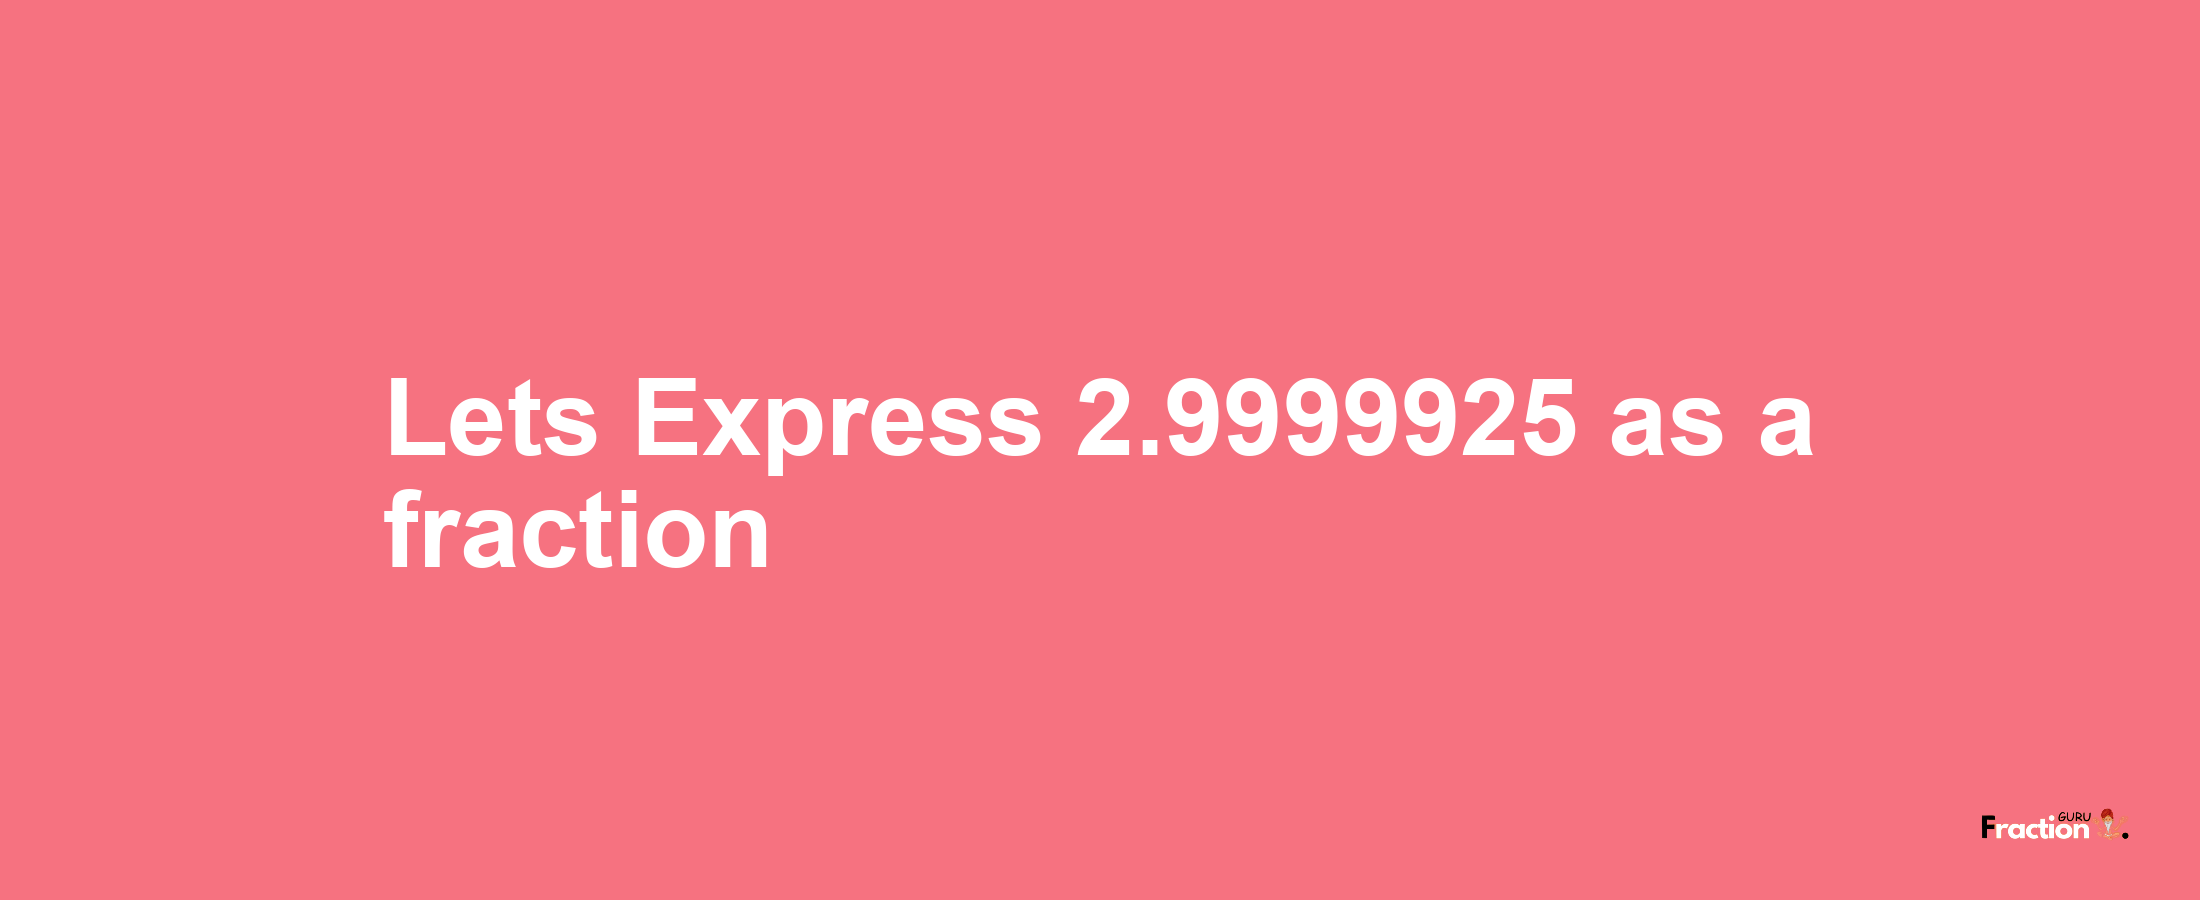 Lets Express 2.9999925 as afraction